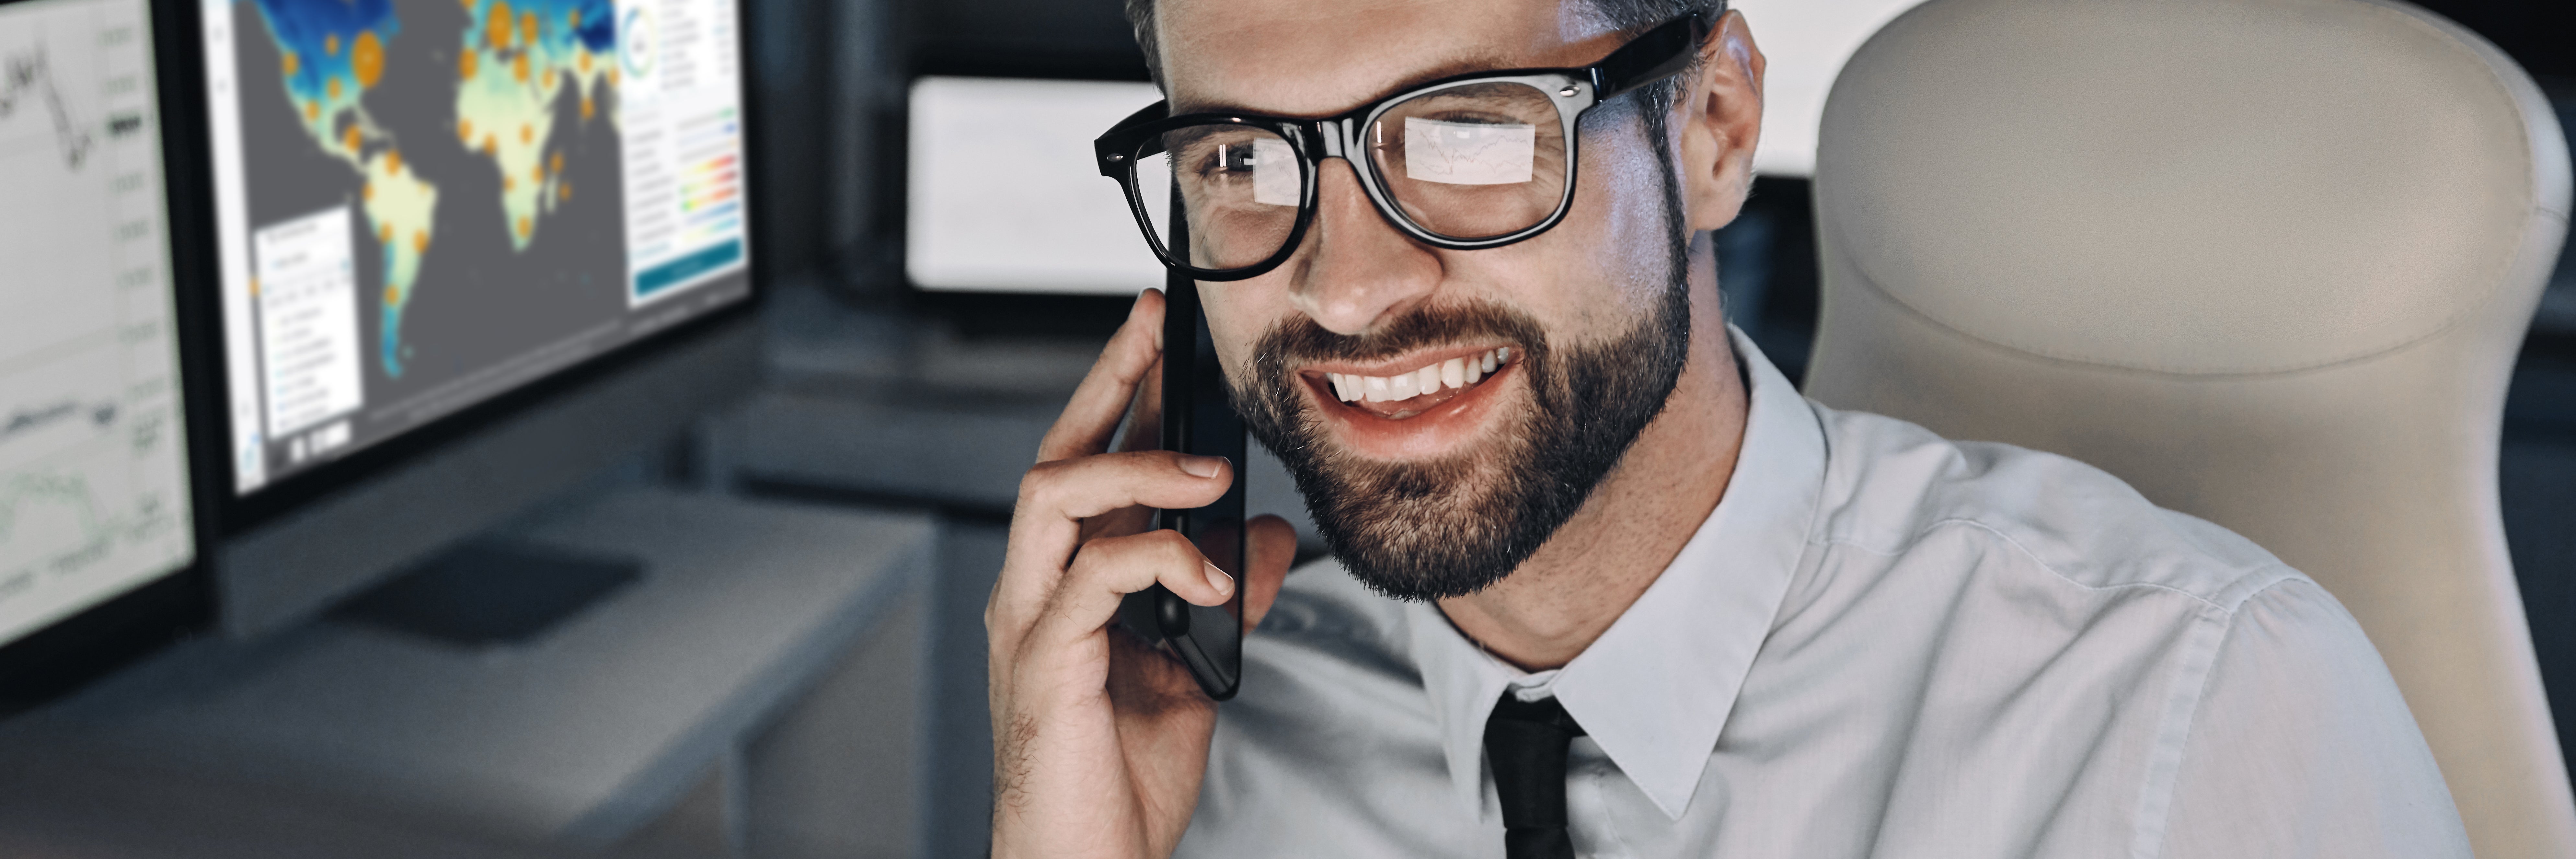 Smiling businessman talking on mobile phone and looking at computer screen in office